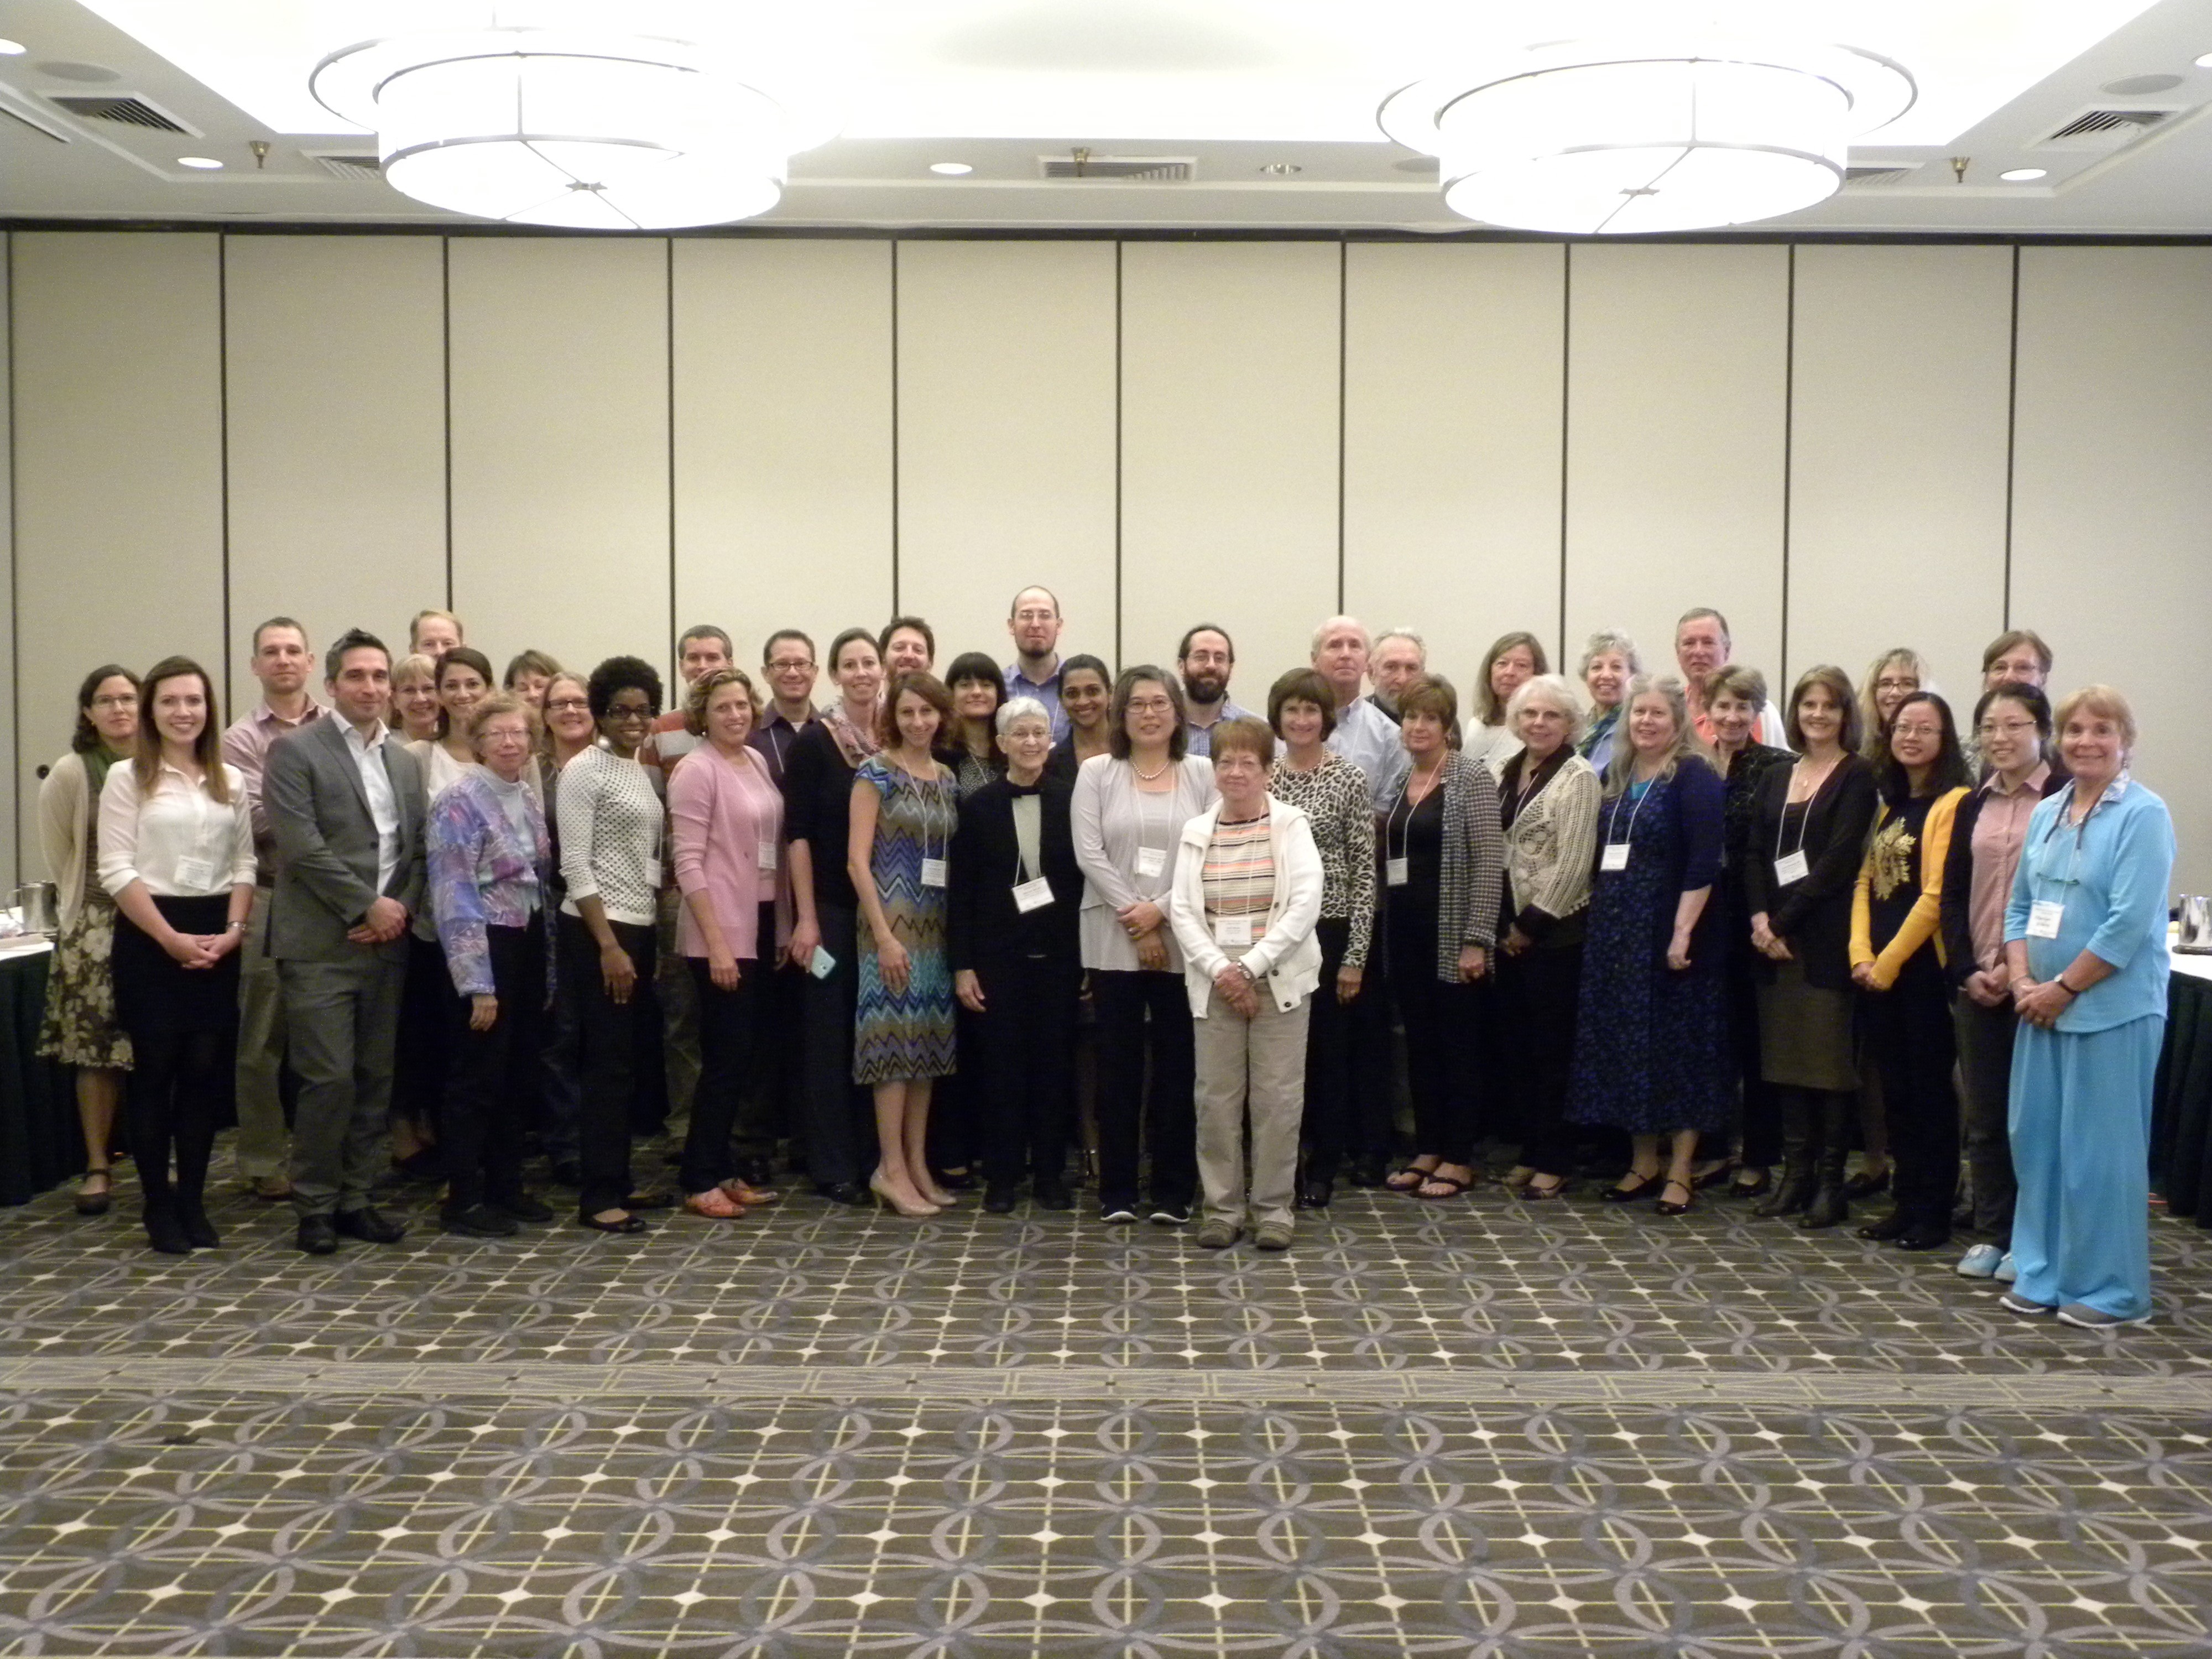 Palliative Care in Parkinson's Disease Conference held at the University of Colorado on 3-4 October 2015.